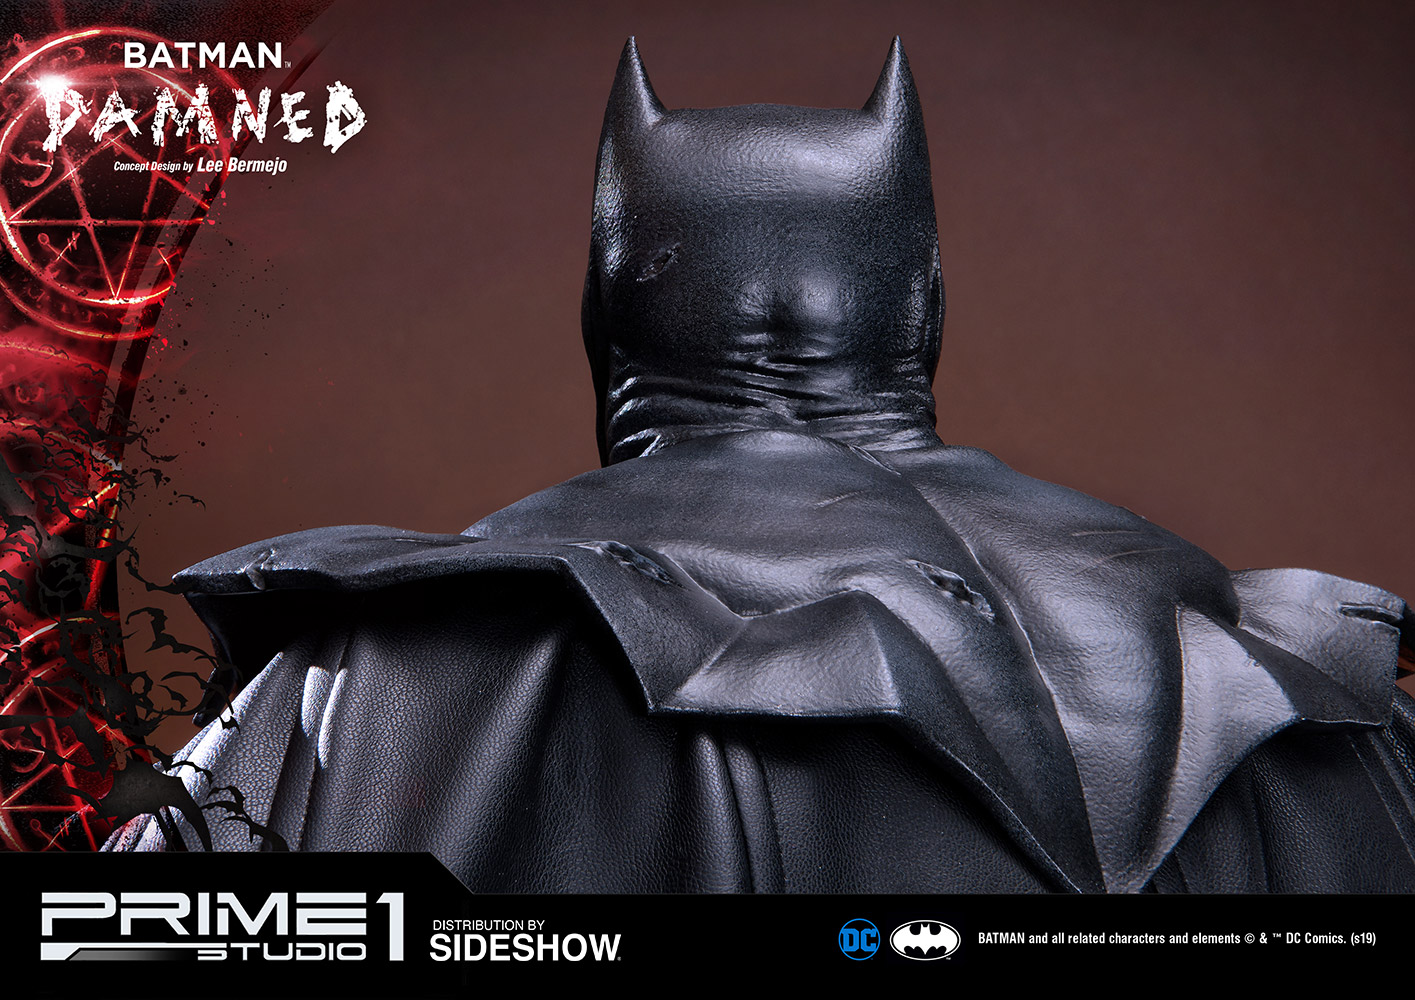 Batman Damned (Concept Design by Lee Bermejo) Collector Edition - Prototype Shown